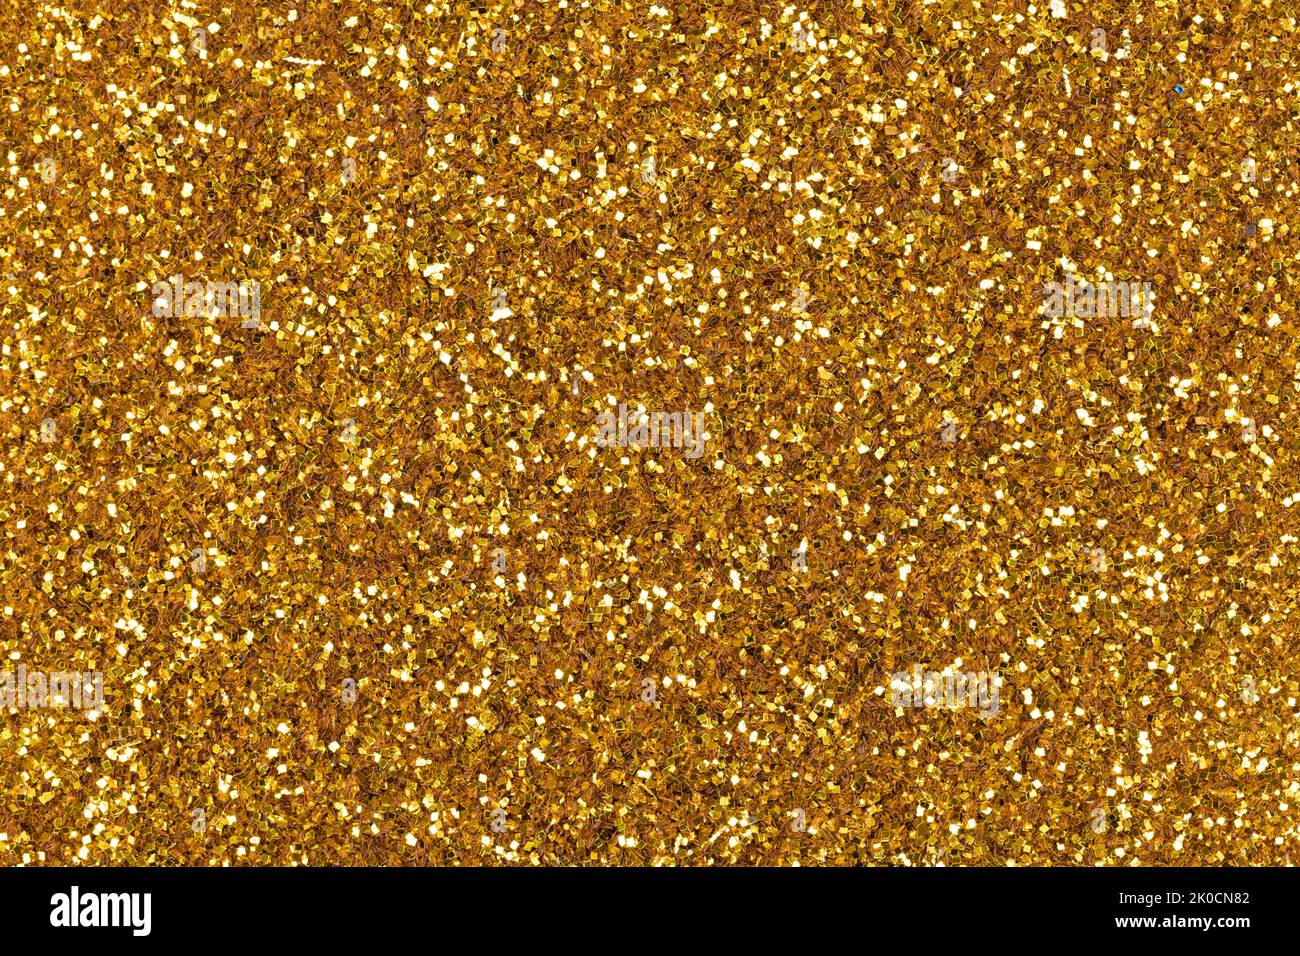 Elegant gold glitter texture, background with attractive shiny surface for design. Sparkling shiny wrapping paper, New Year holiday seasonal wallpaper Stock Photo